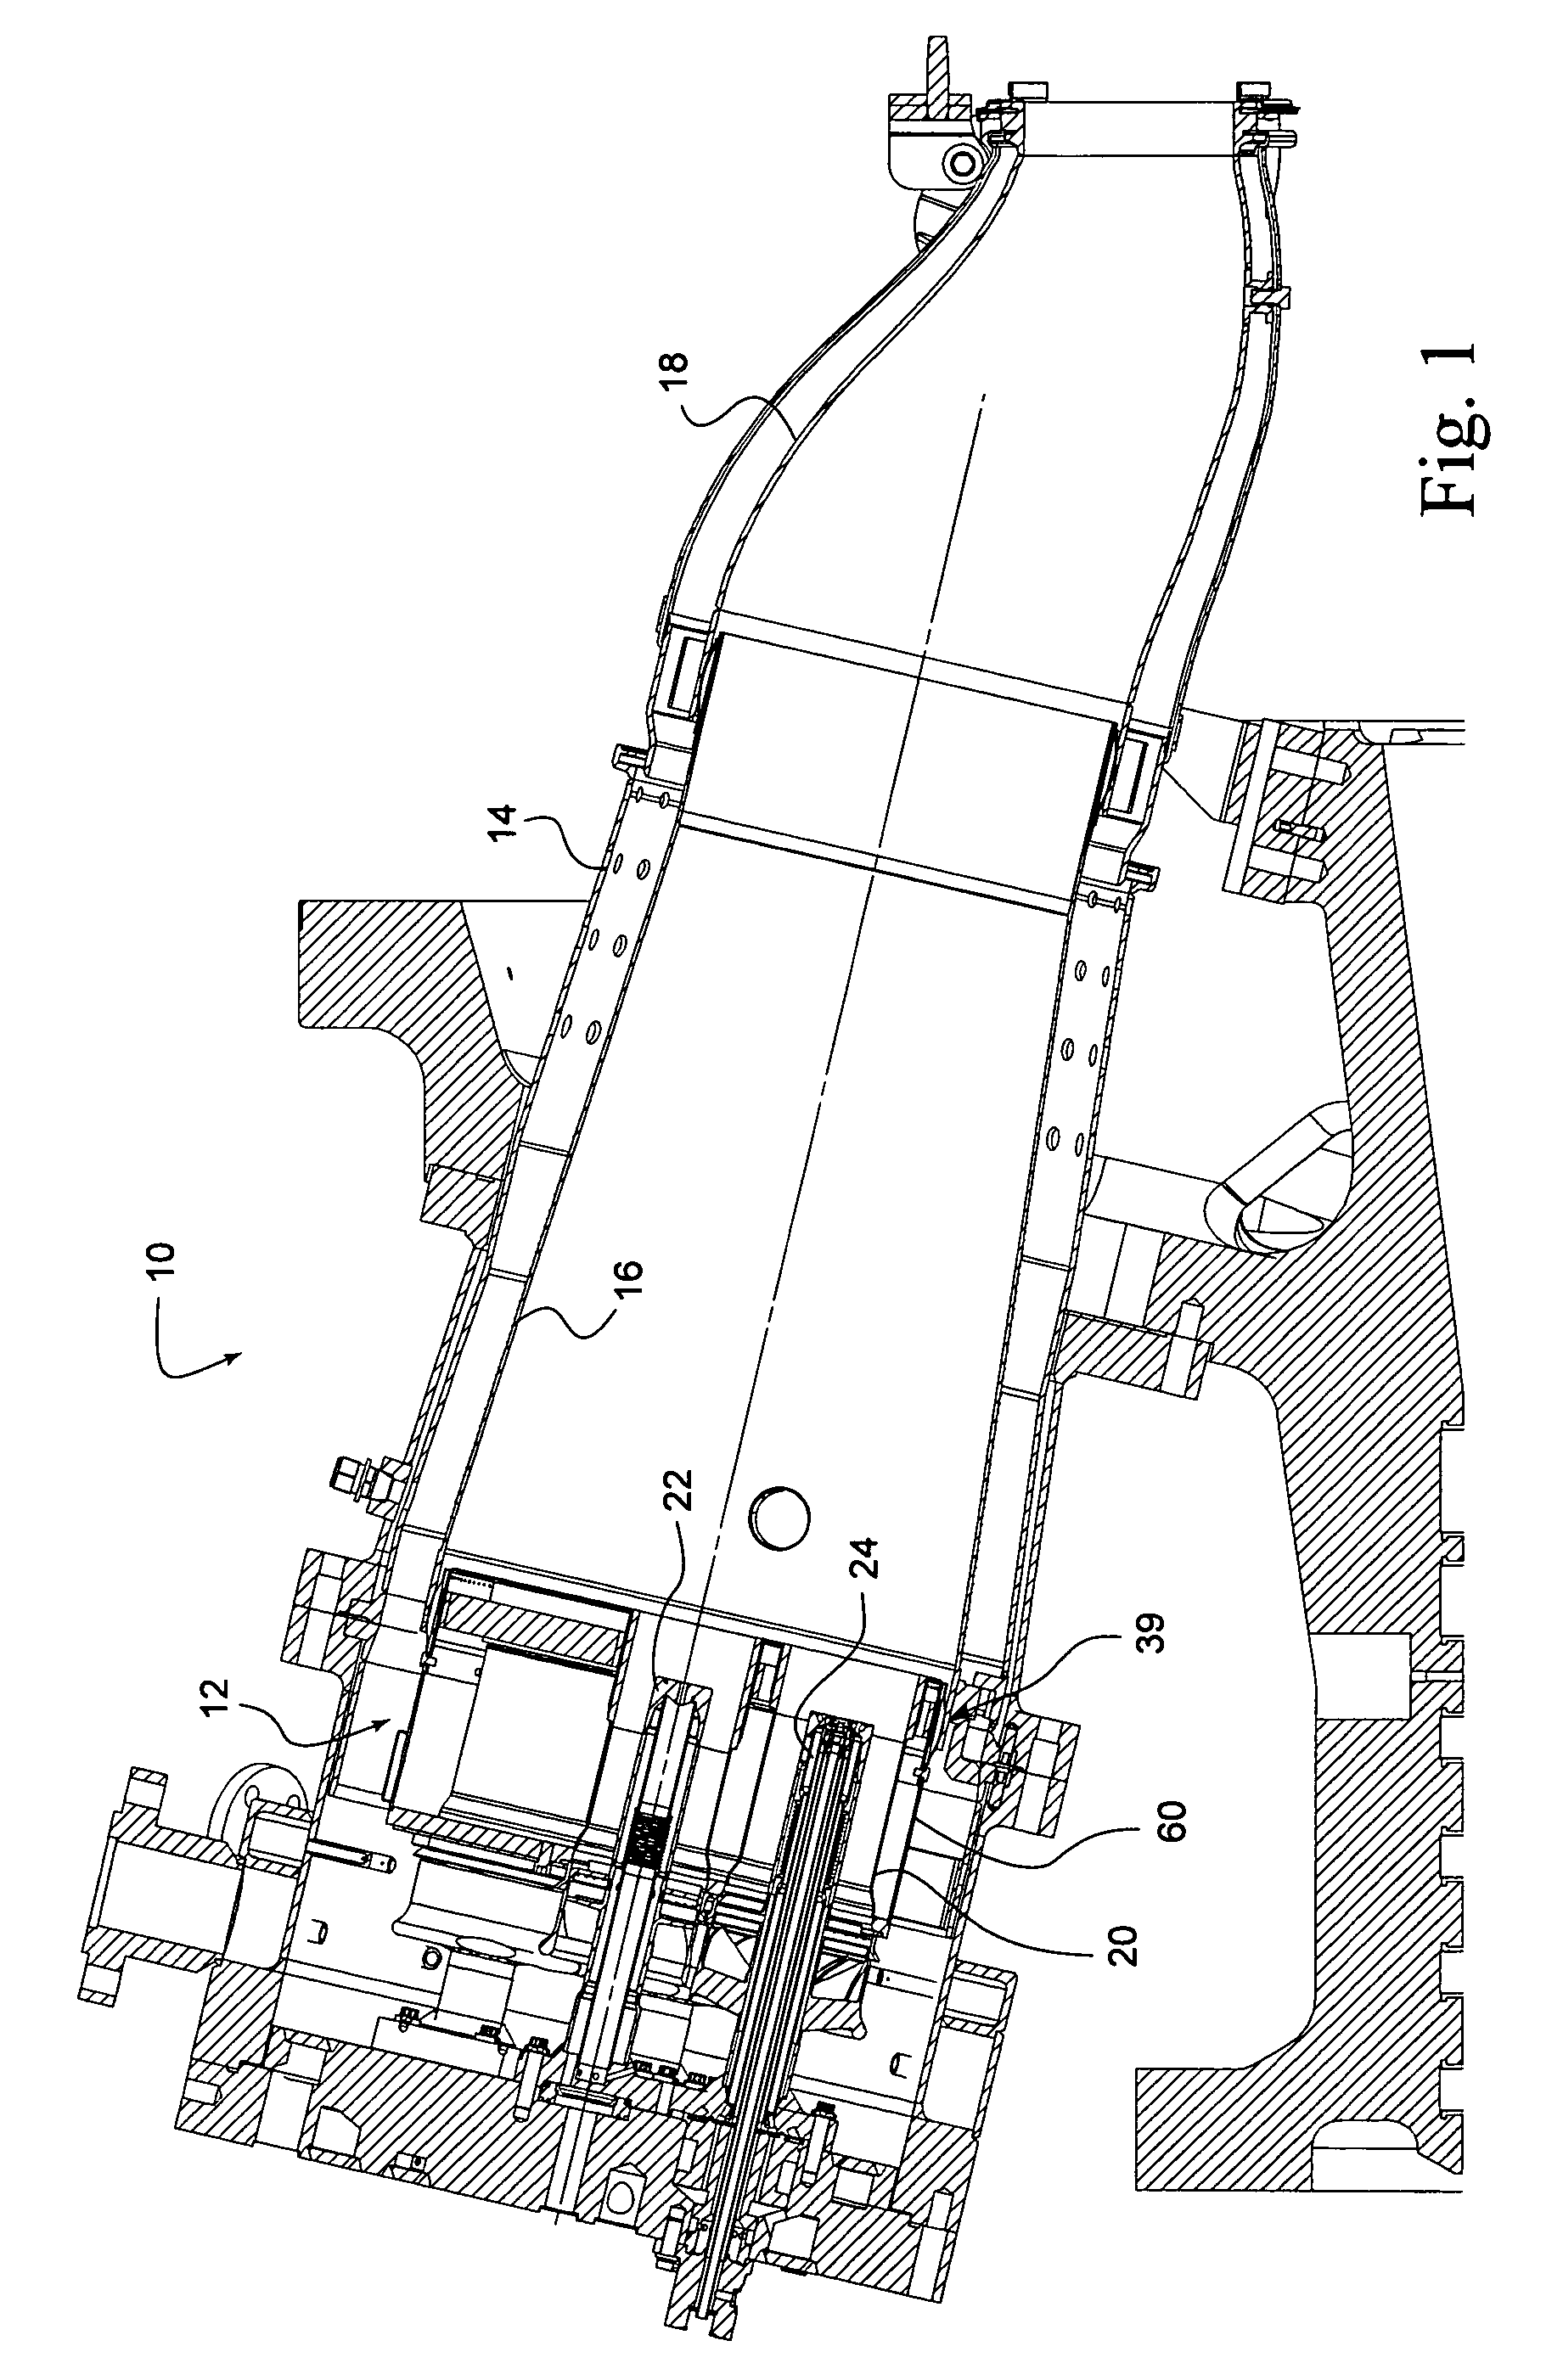 Combustor and cap assemblies for combustors in a gas turbine